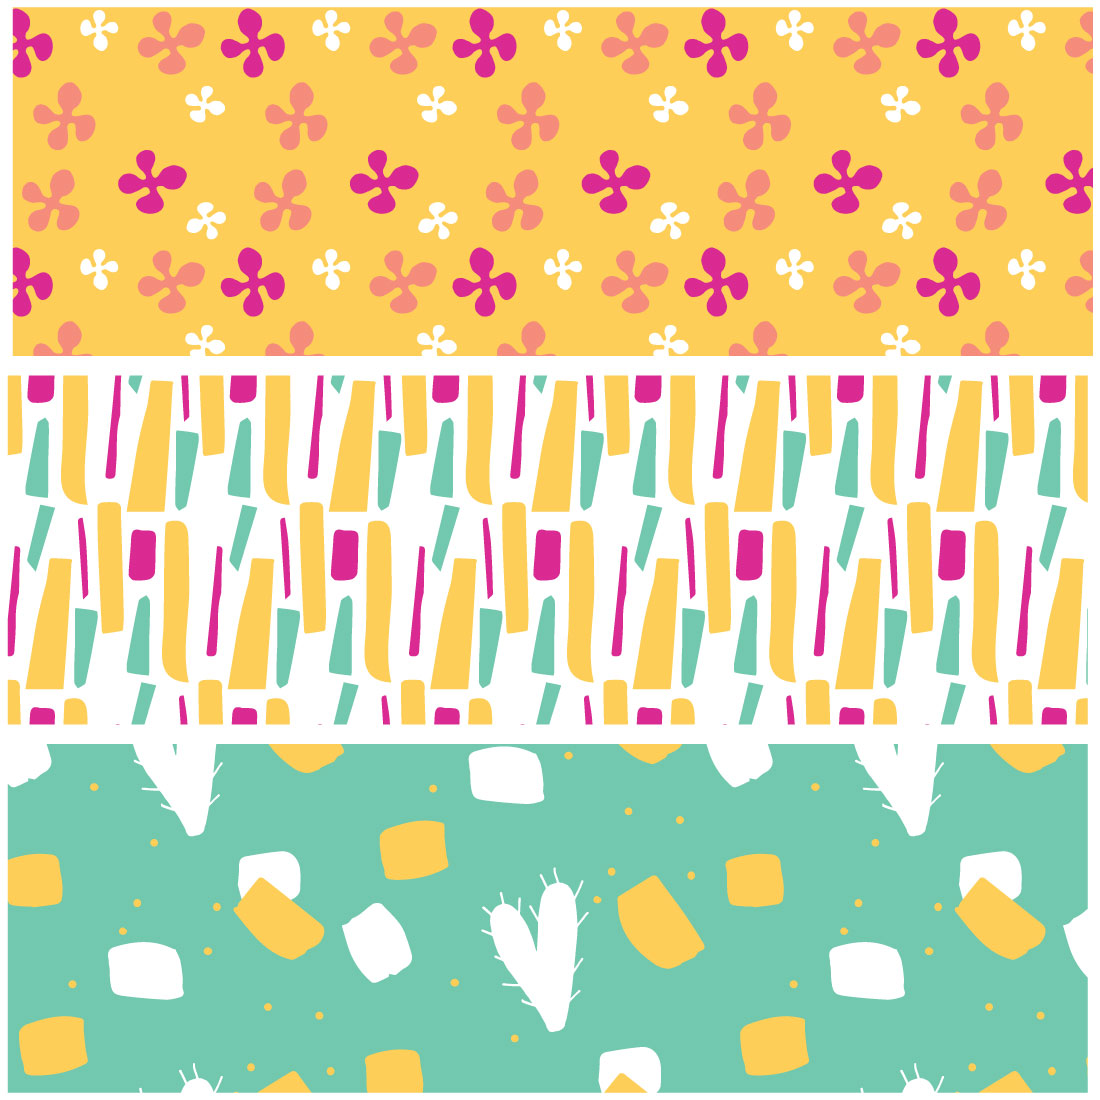 Summer Seamless Patterns cover image.